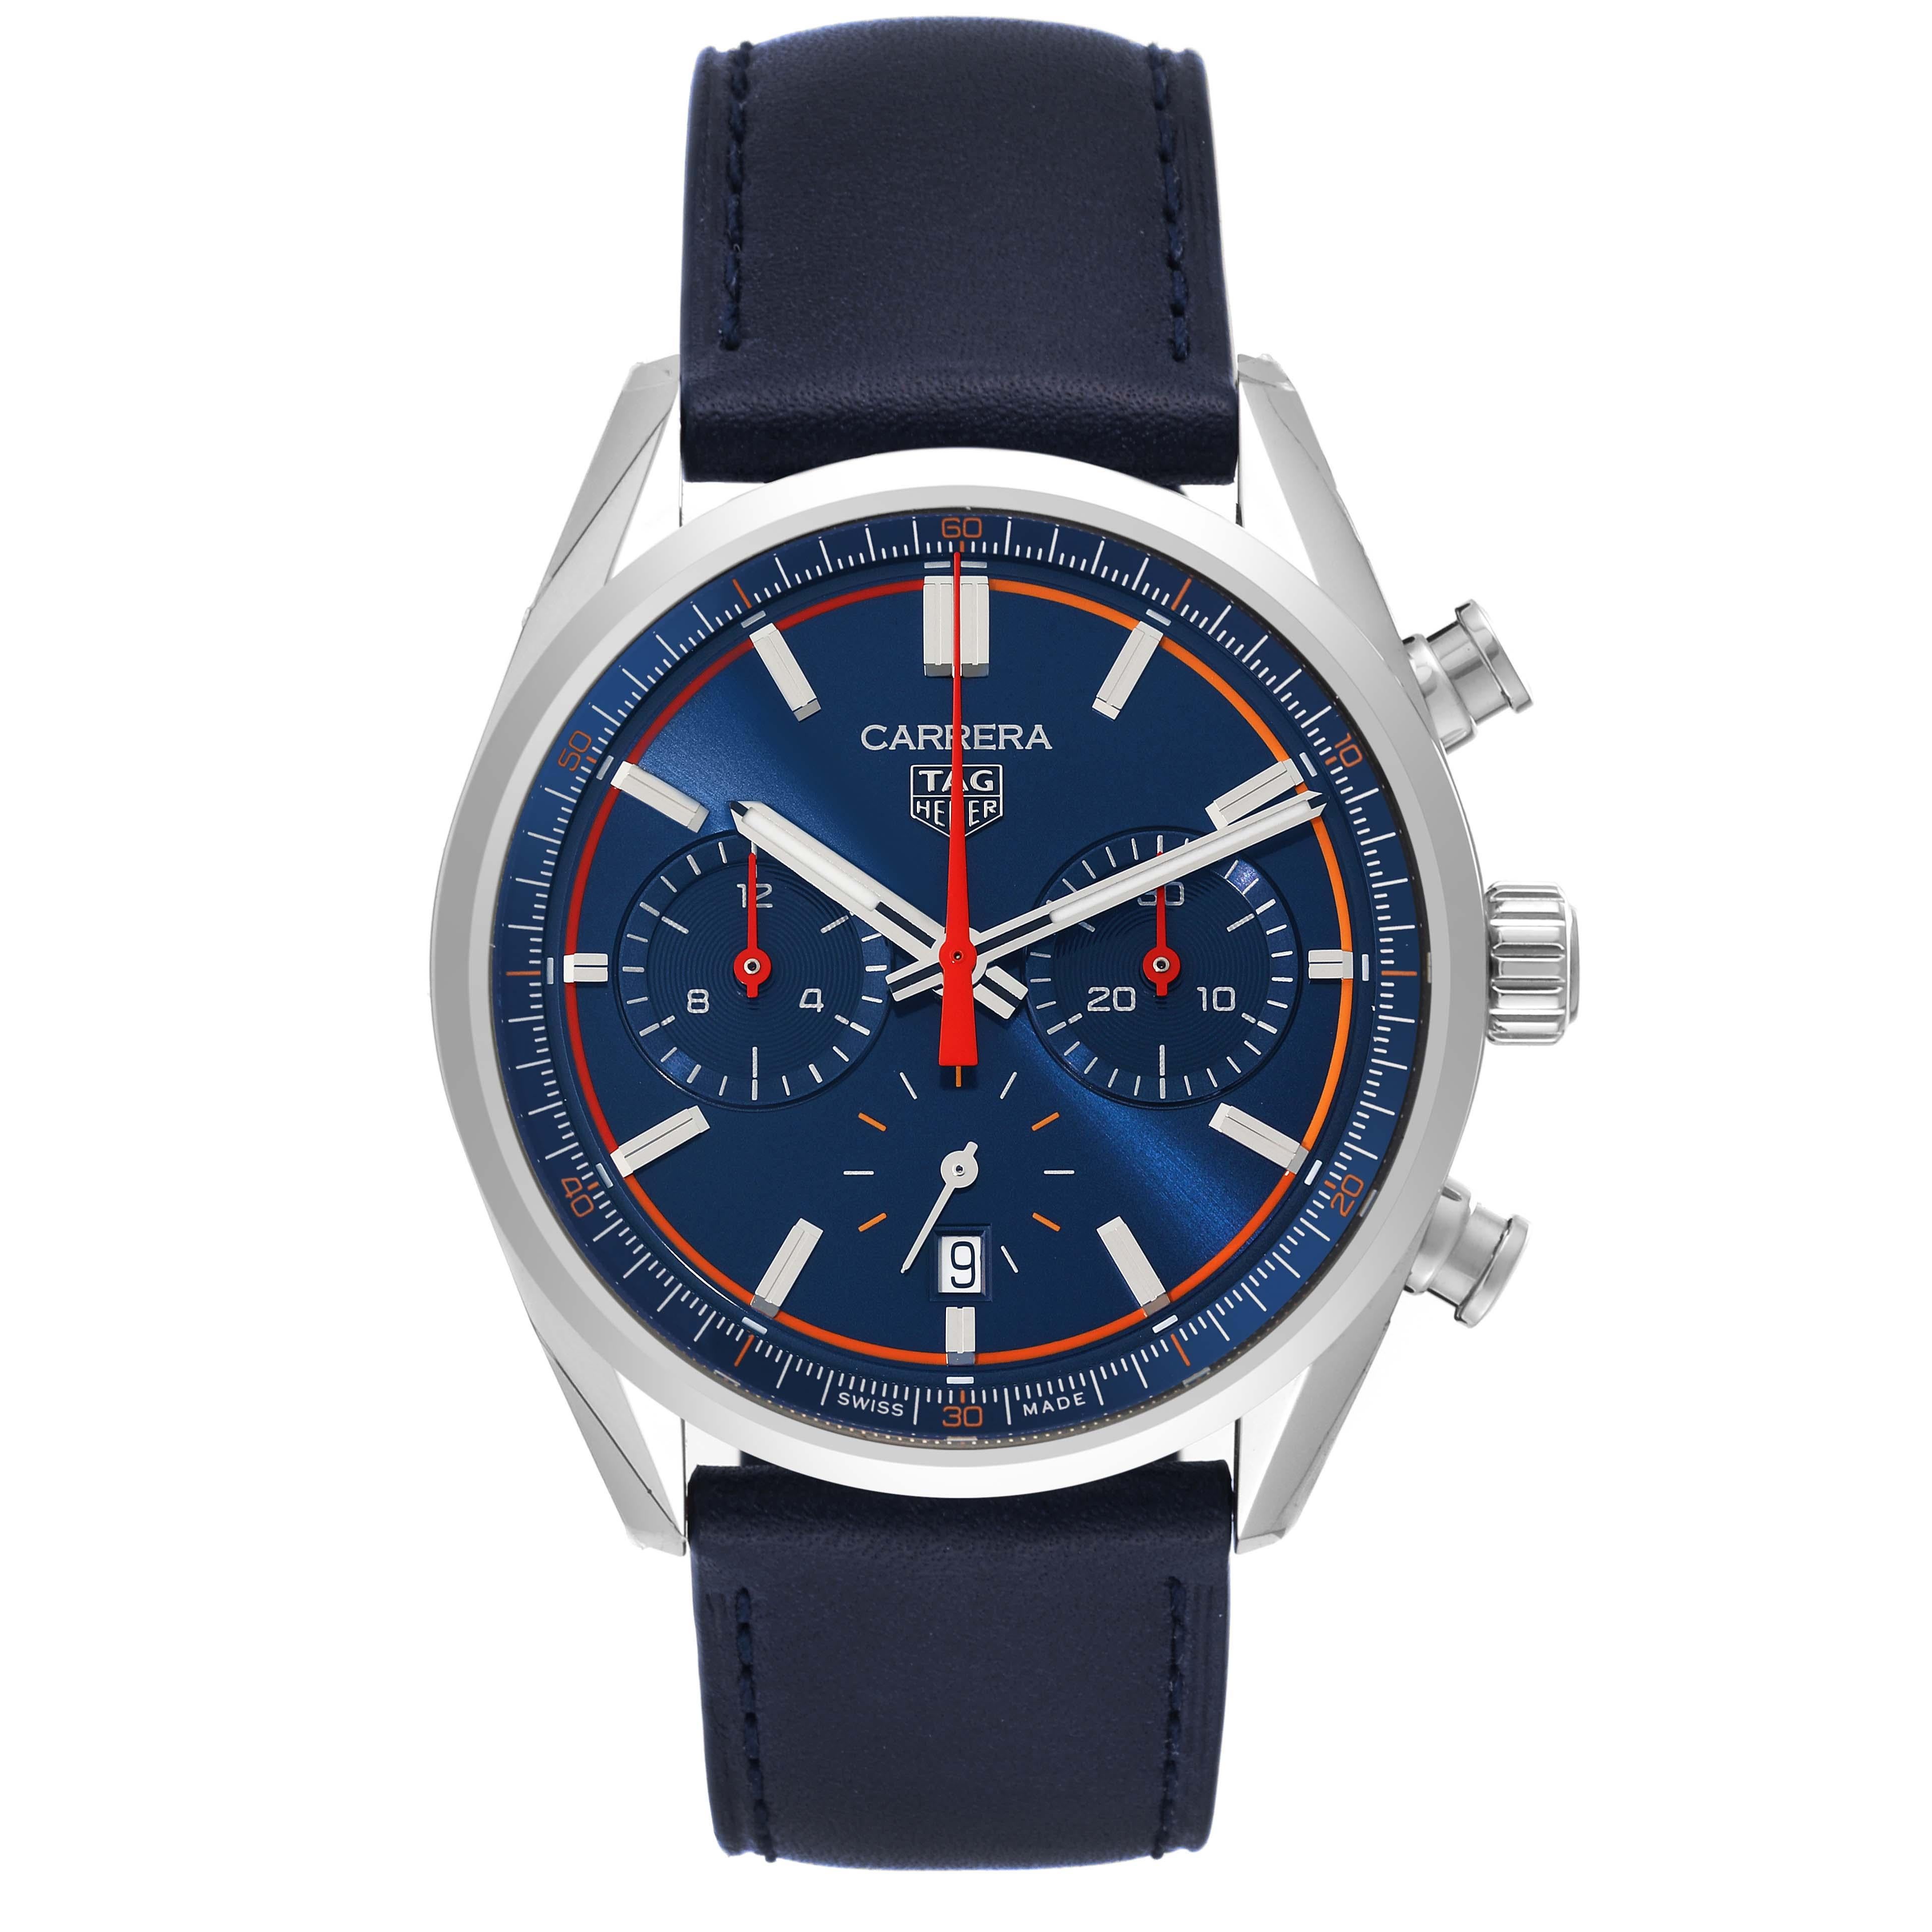 Tag Heuer Carrera Chronograph Blue Dial Steel Mens Watch CBN201D Unworn. Automatic self-winding chronograph movement. Polished stainless steel case 42.0 mm in diameter. Transparent exhibition sapphire crystal caseback. Polished stainless steel